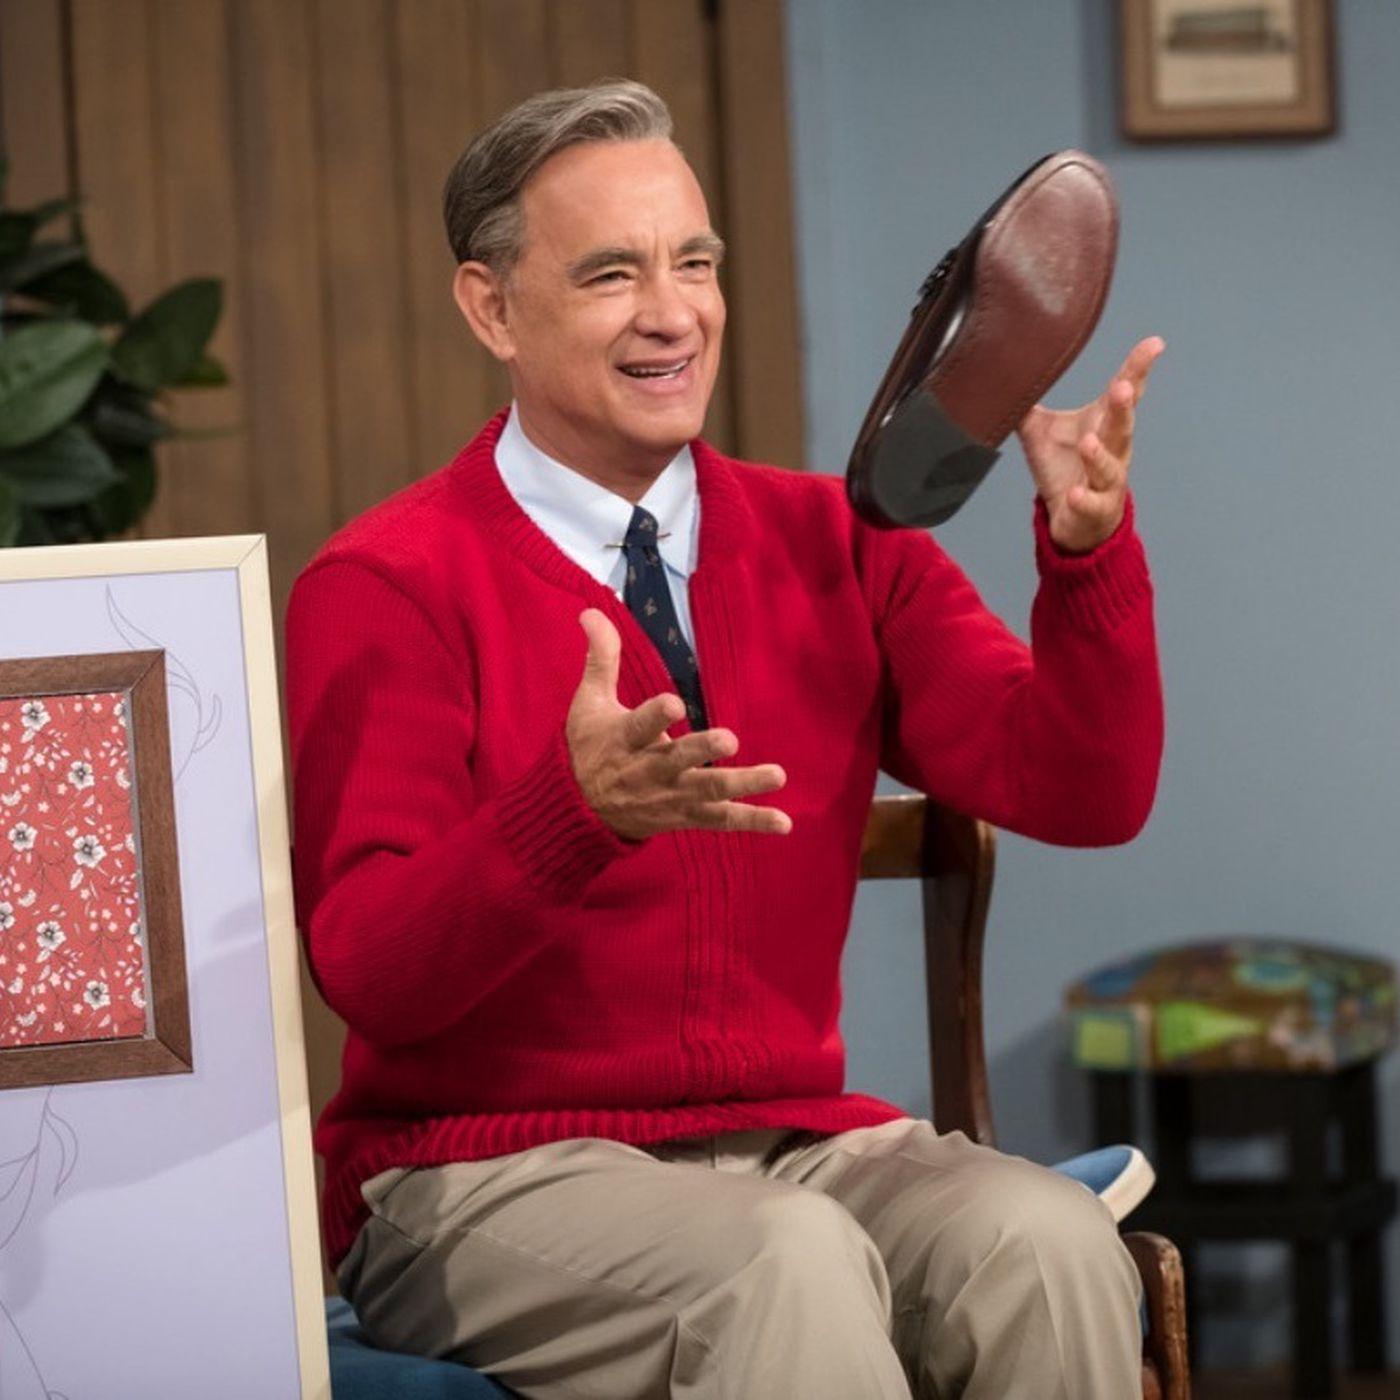 Tom Hanks is Mister Rogers in A Beautiful Day in